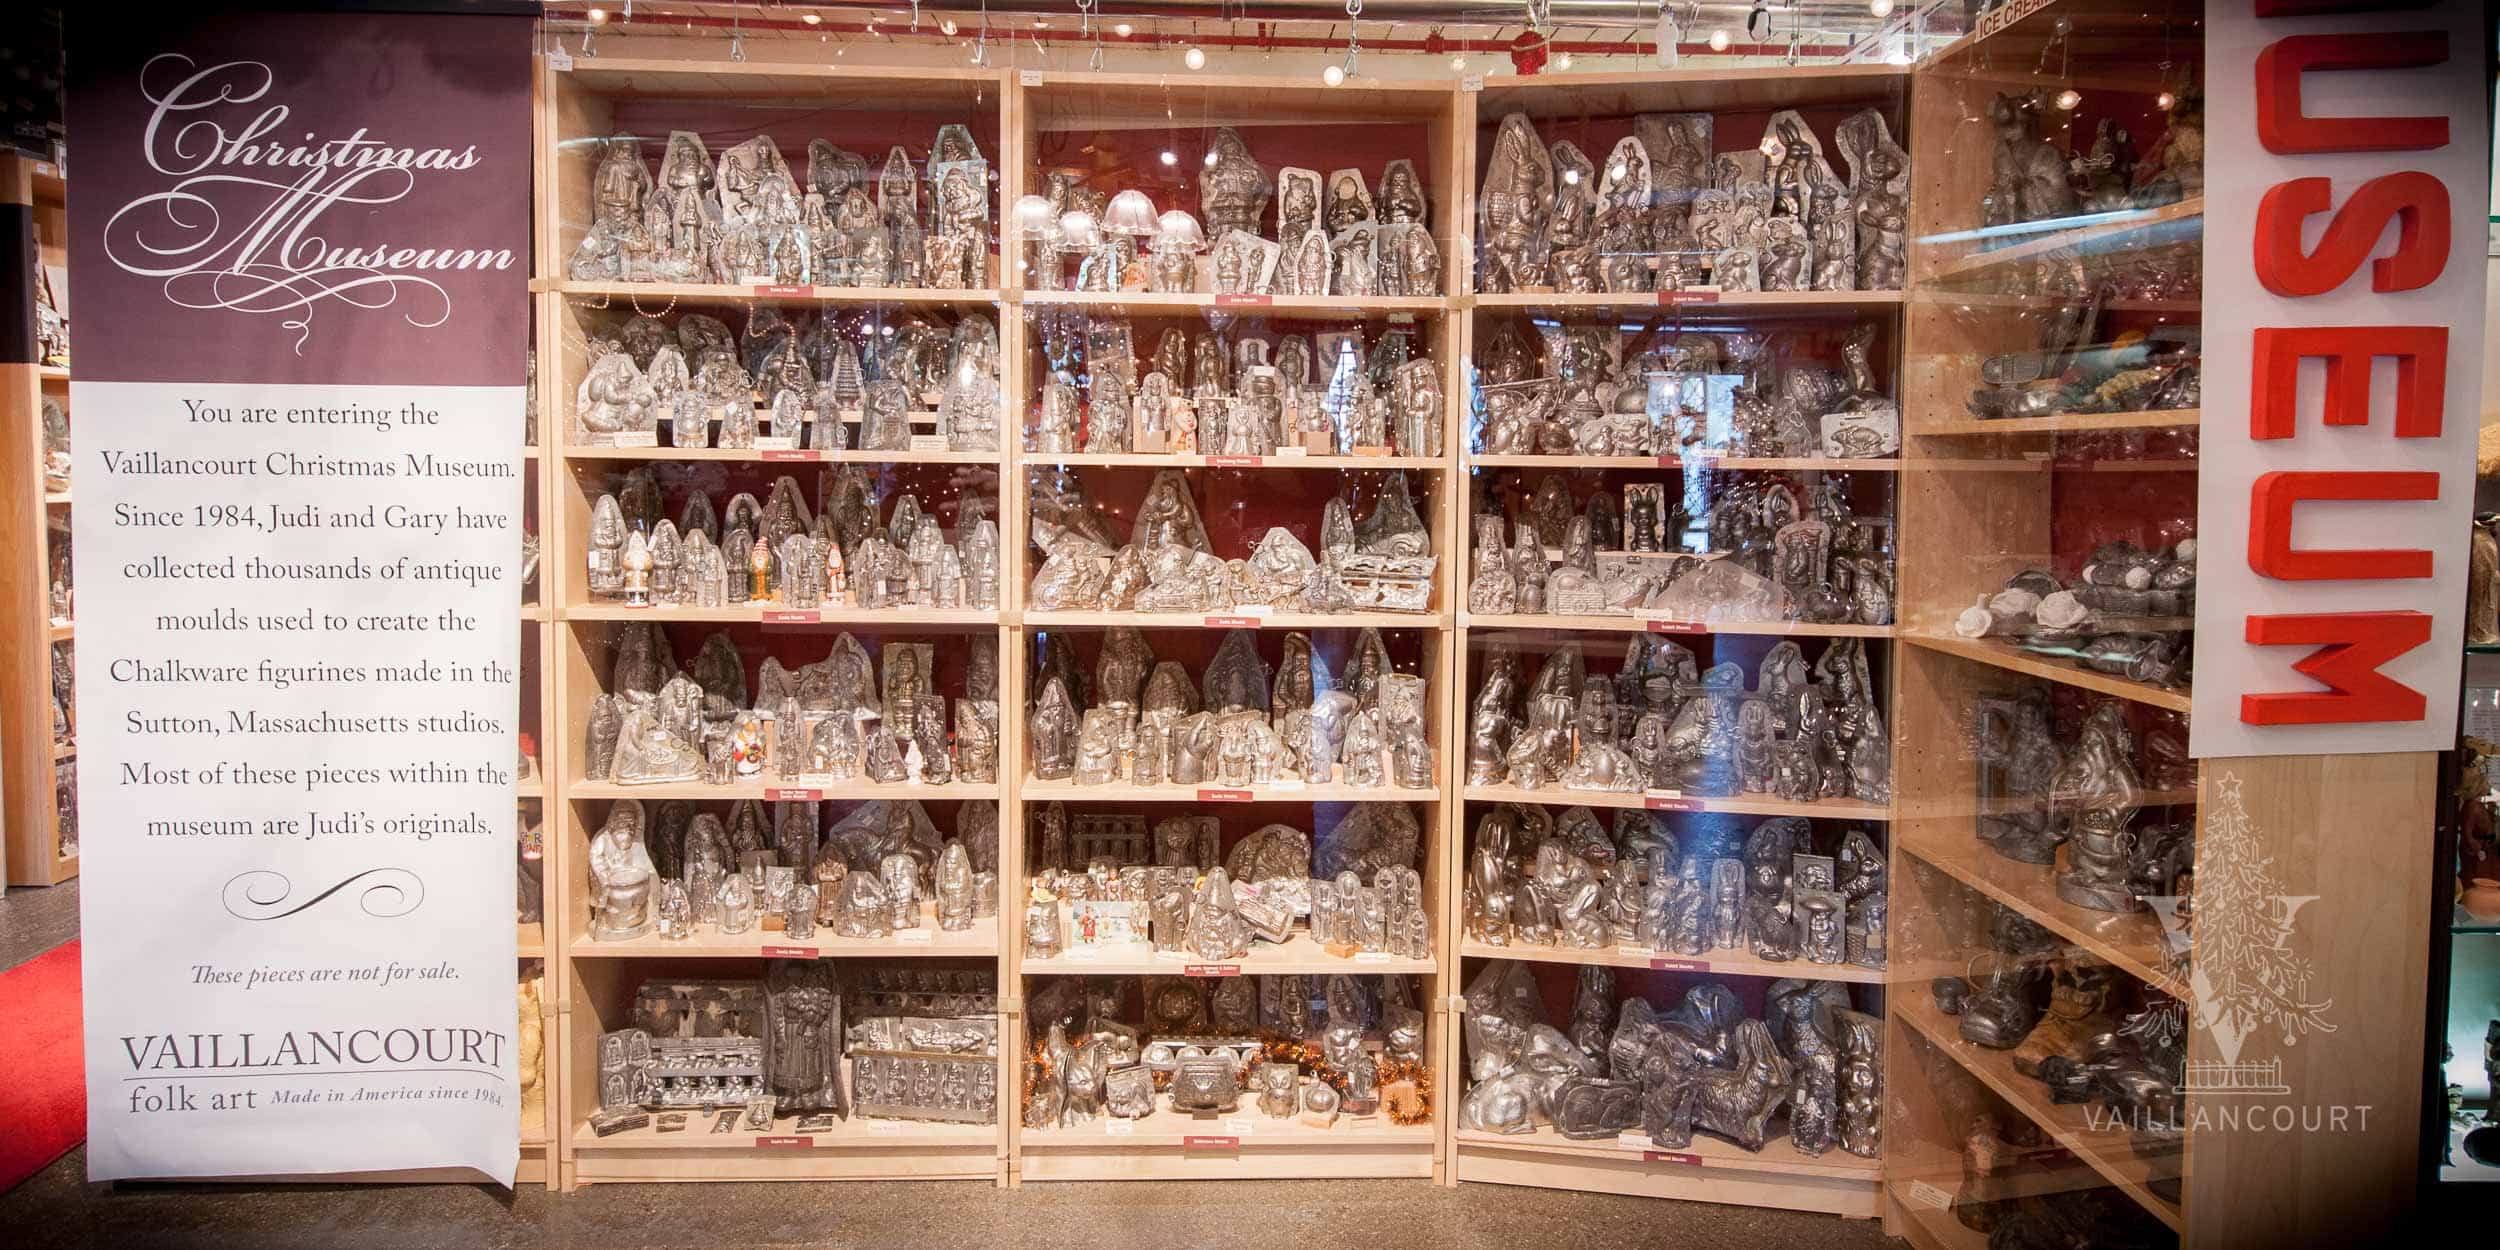 The Vaillancourt Christmas Museum in Sutton, MA prominently displays the largest personal collection of vintage confectionary and chocolate moulds.